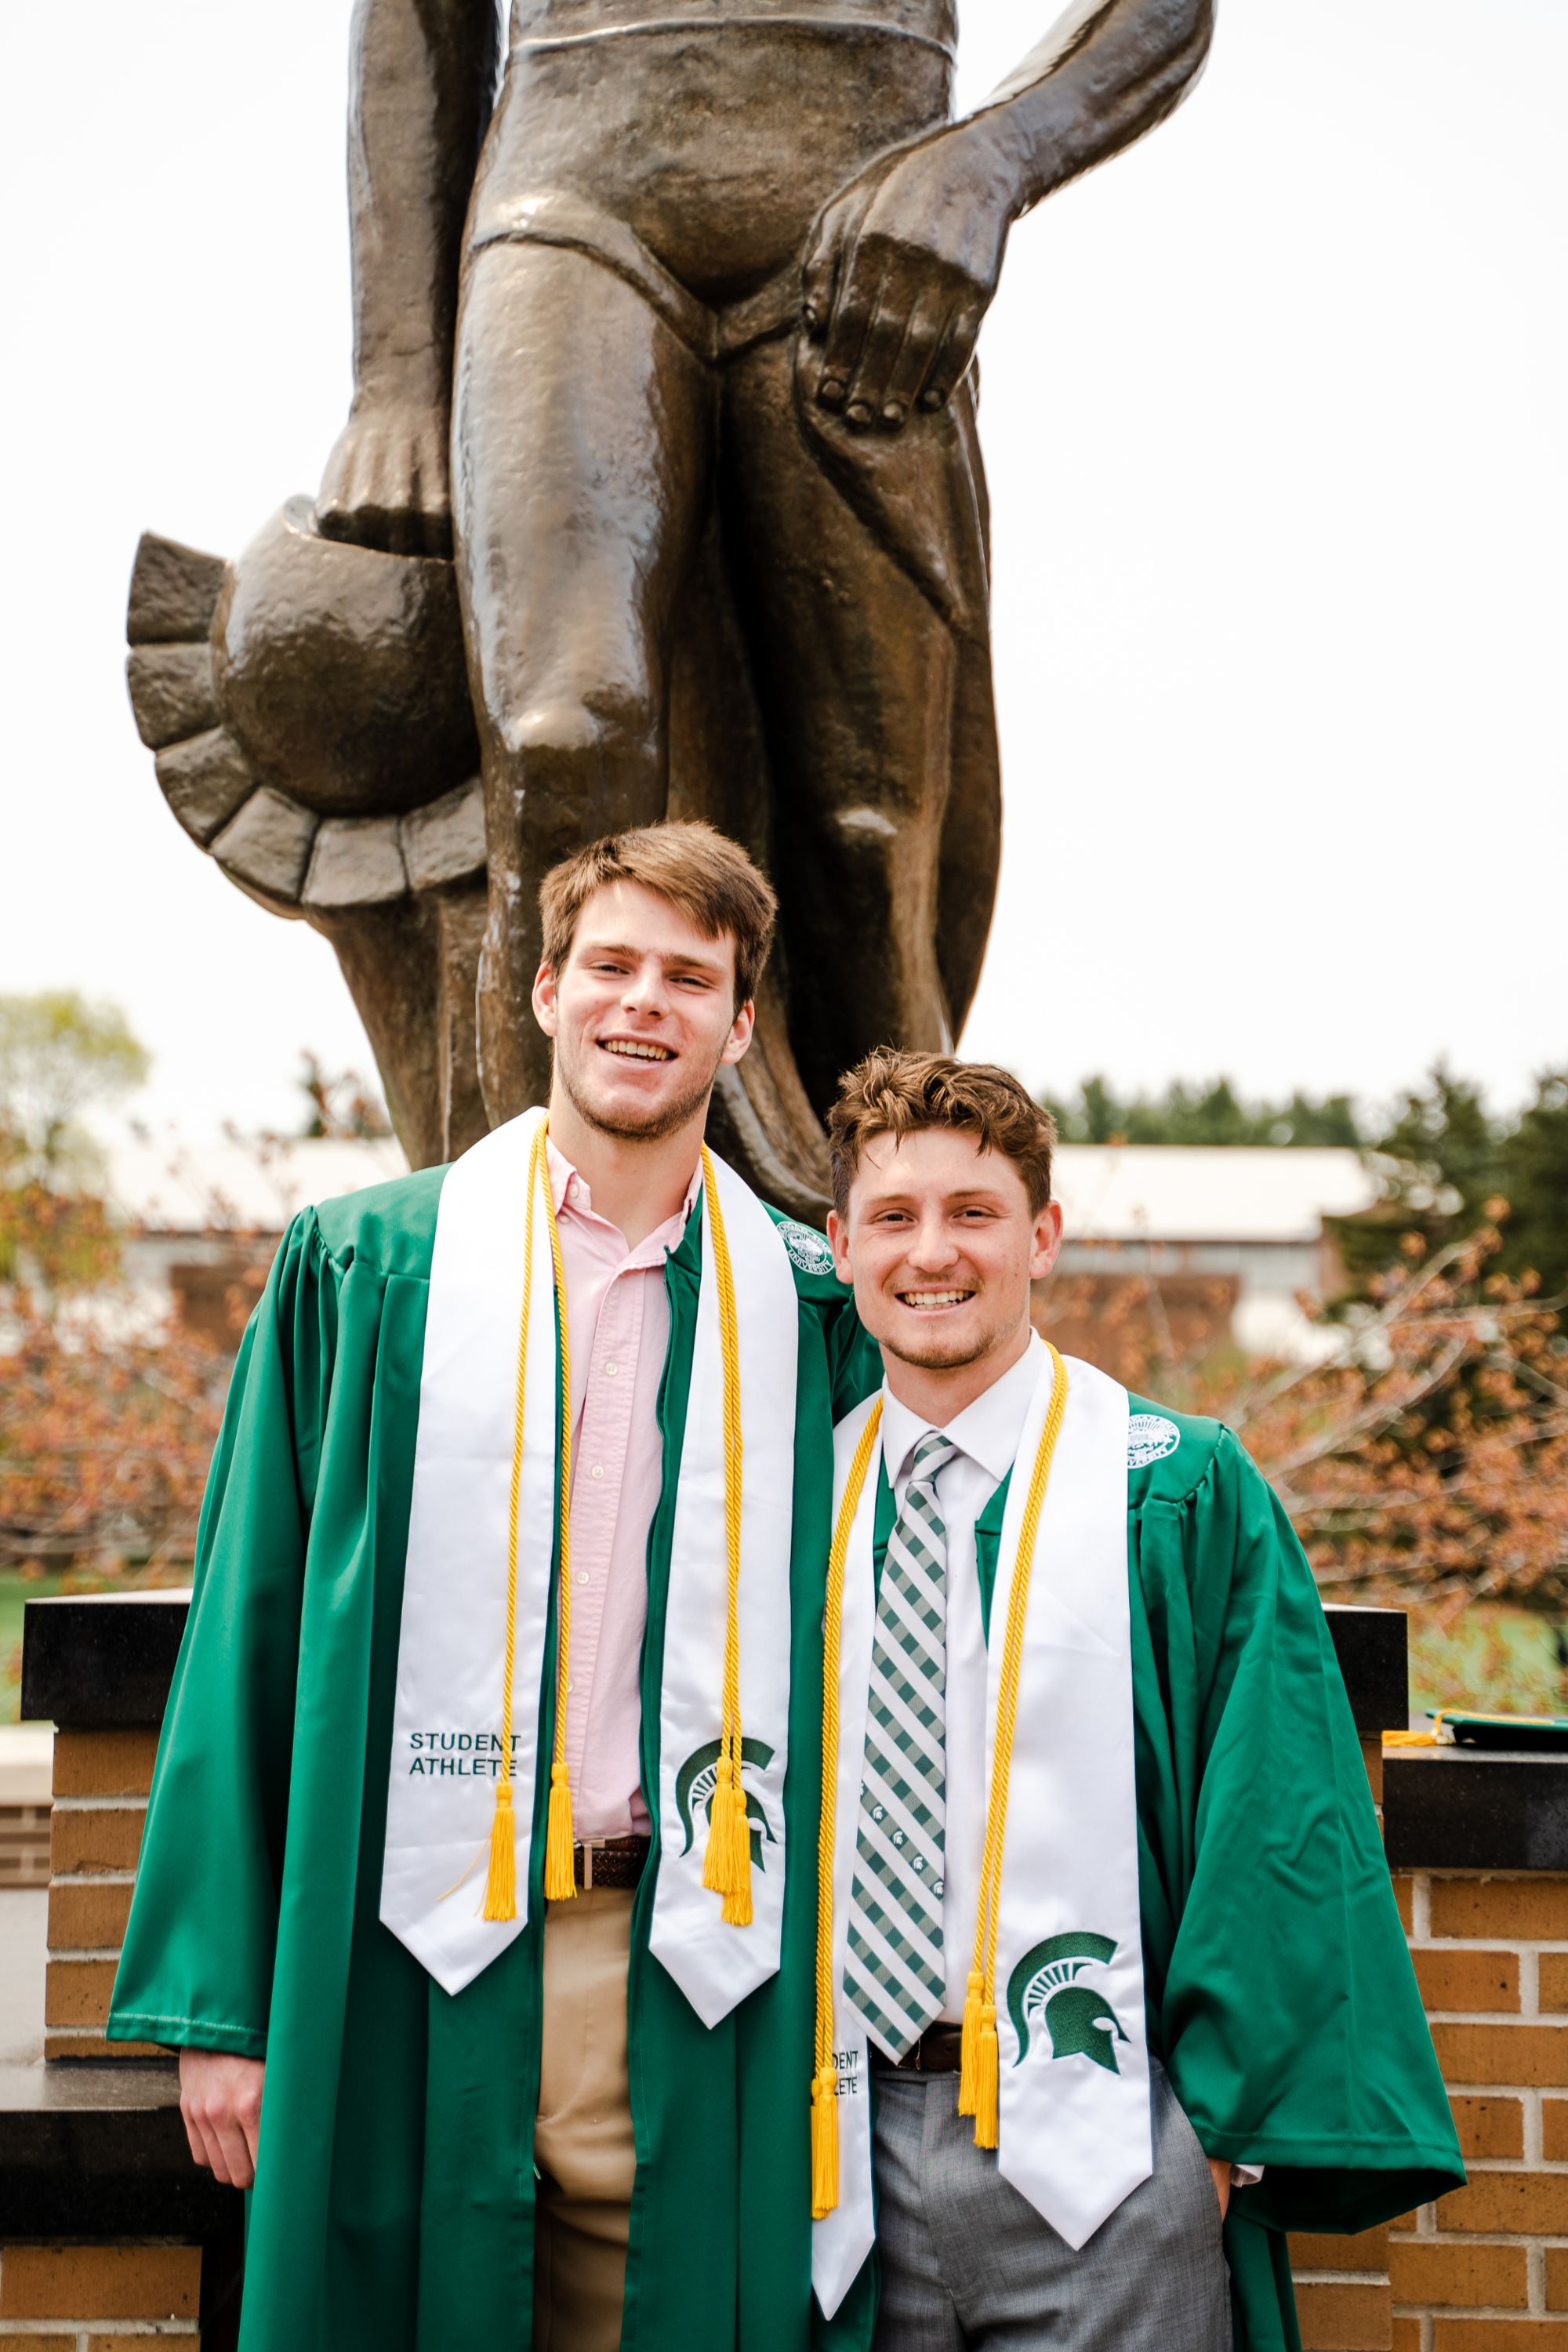 A picture of Carson Gates with his roommate Nick Williams during graduation.